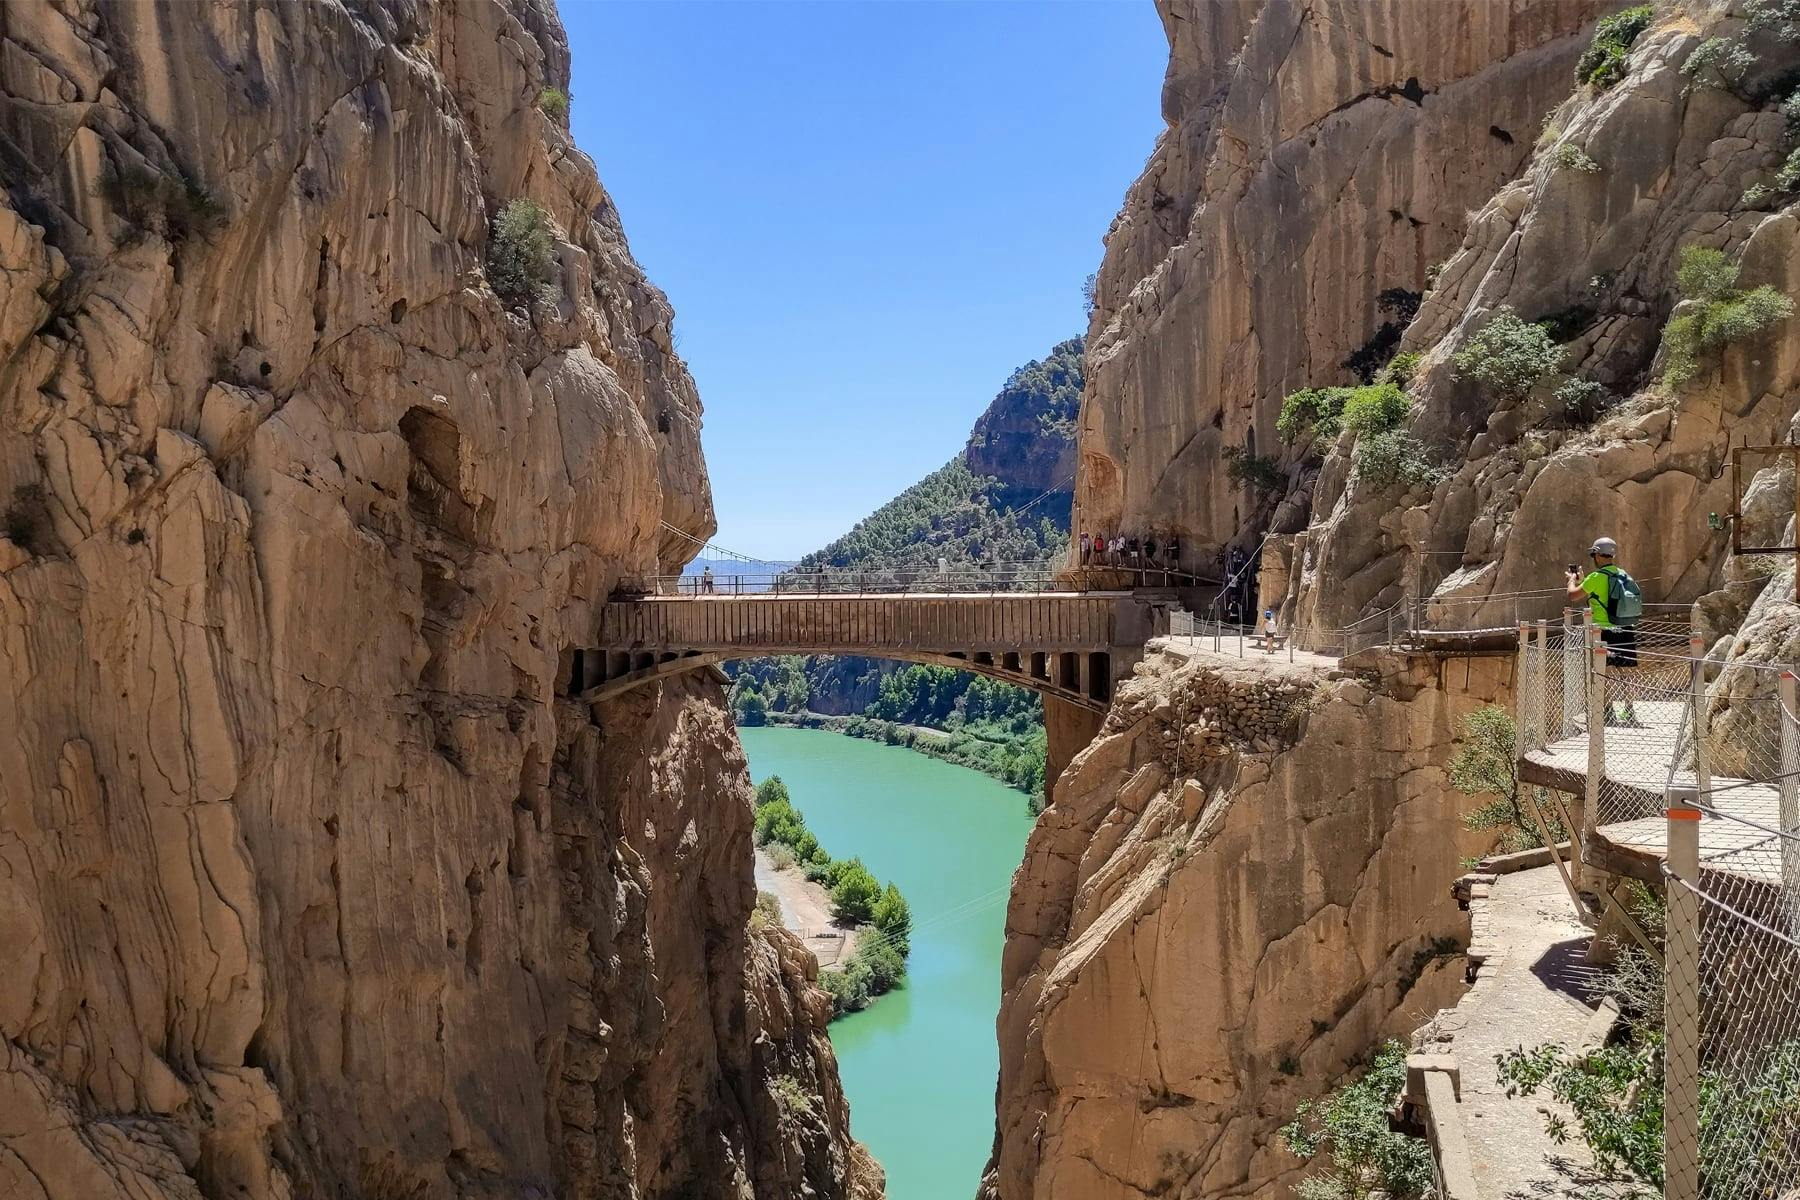 Nat Geo Day Tour: Birdwatching in Caminito del Rey